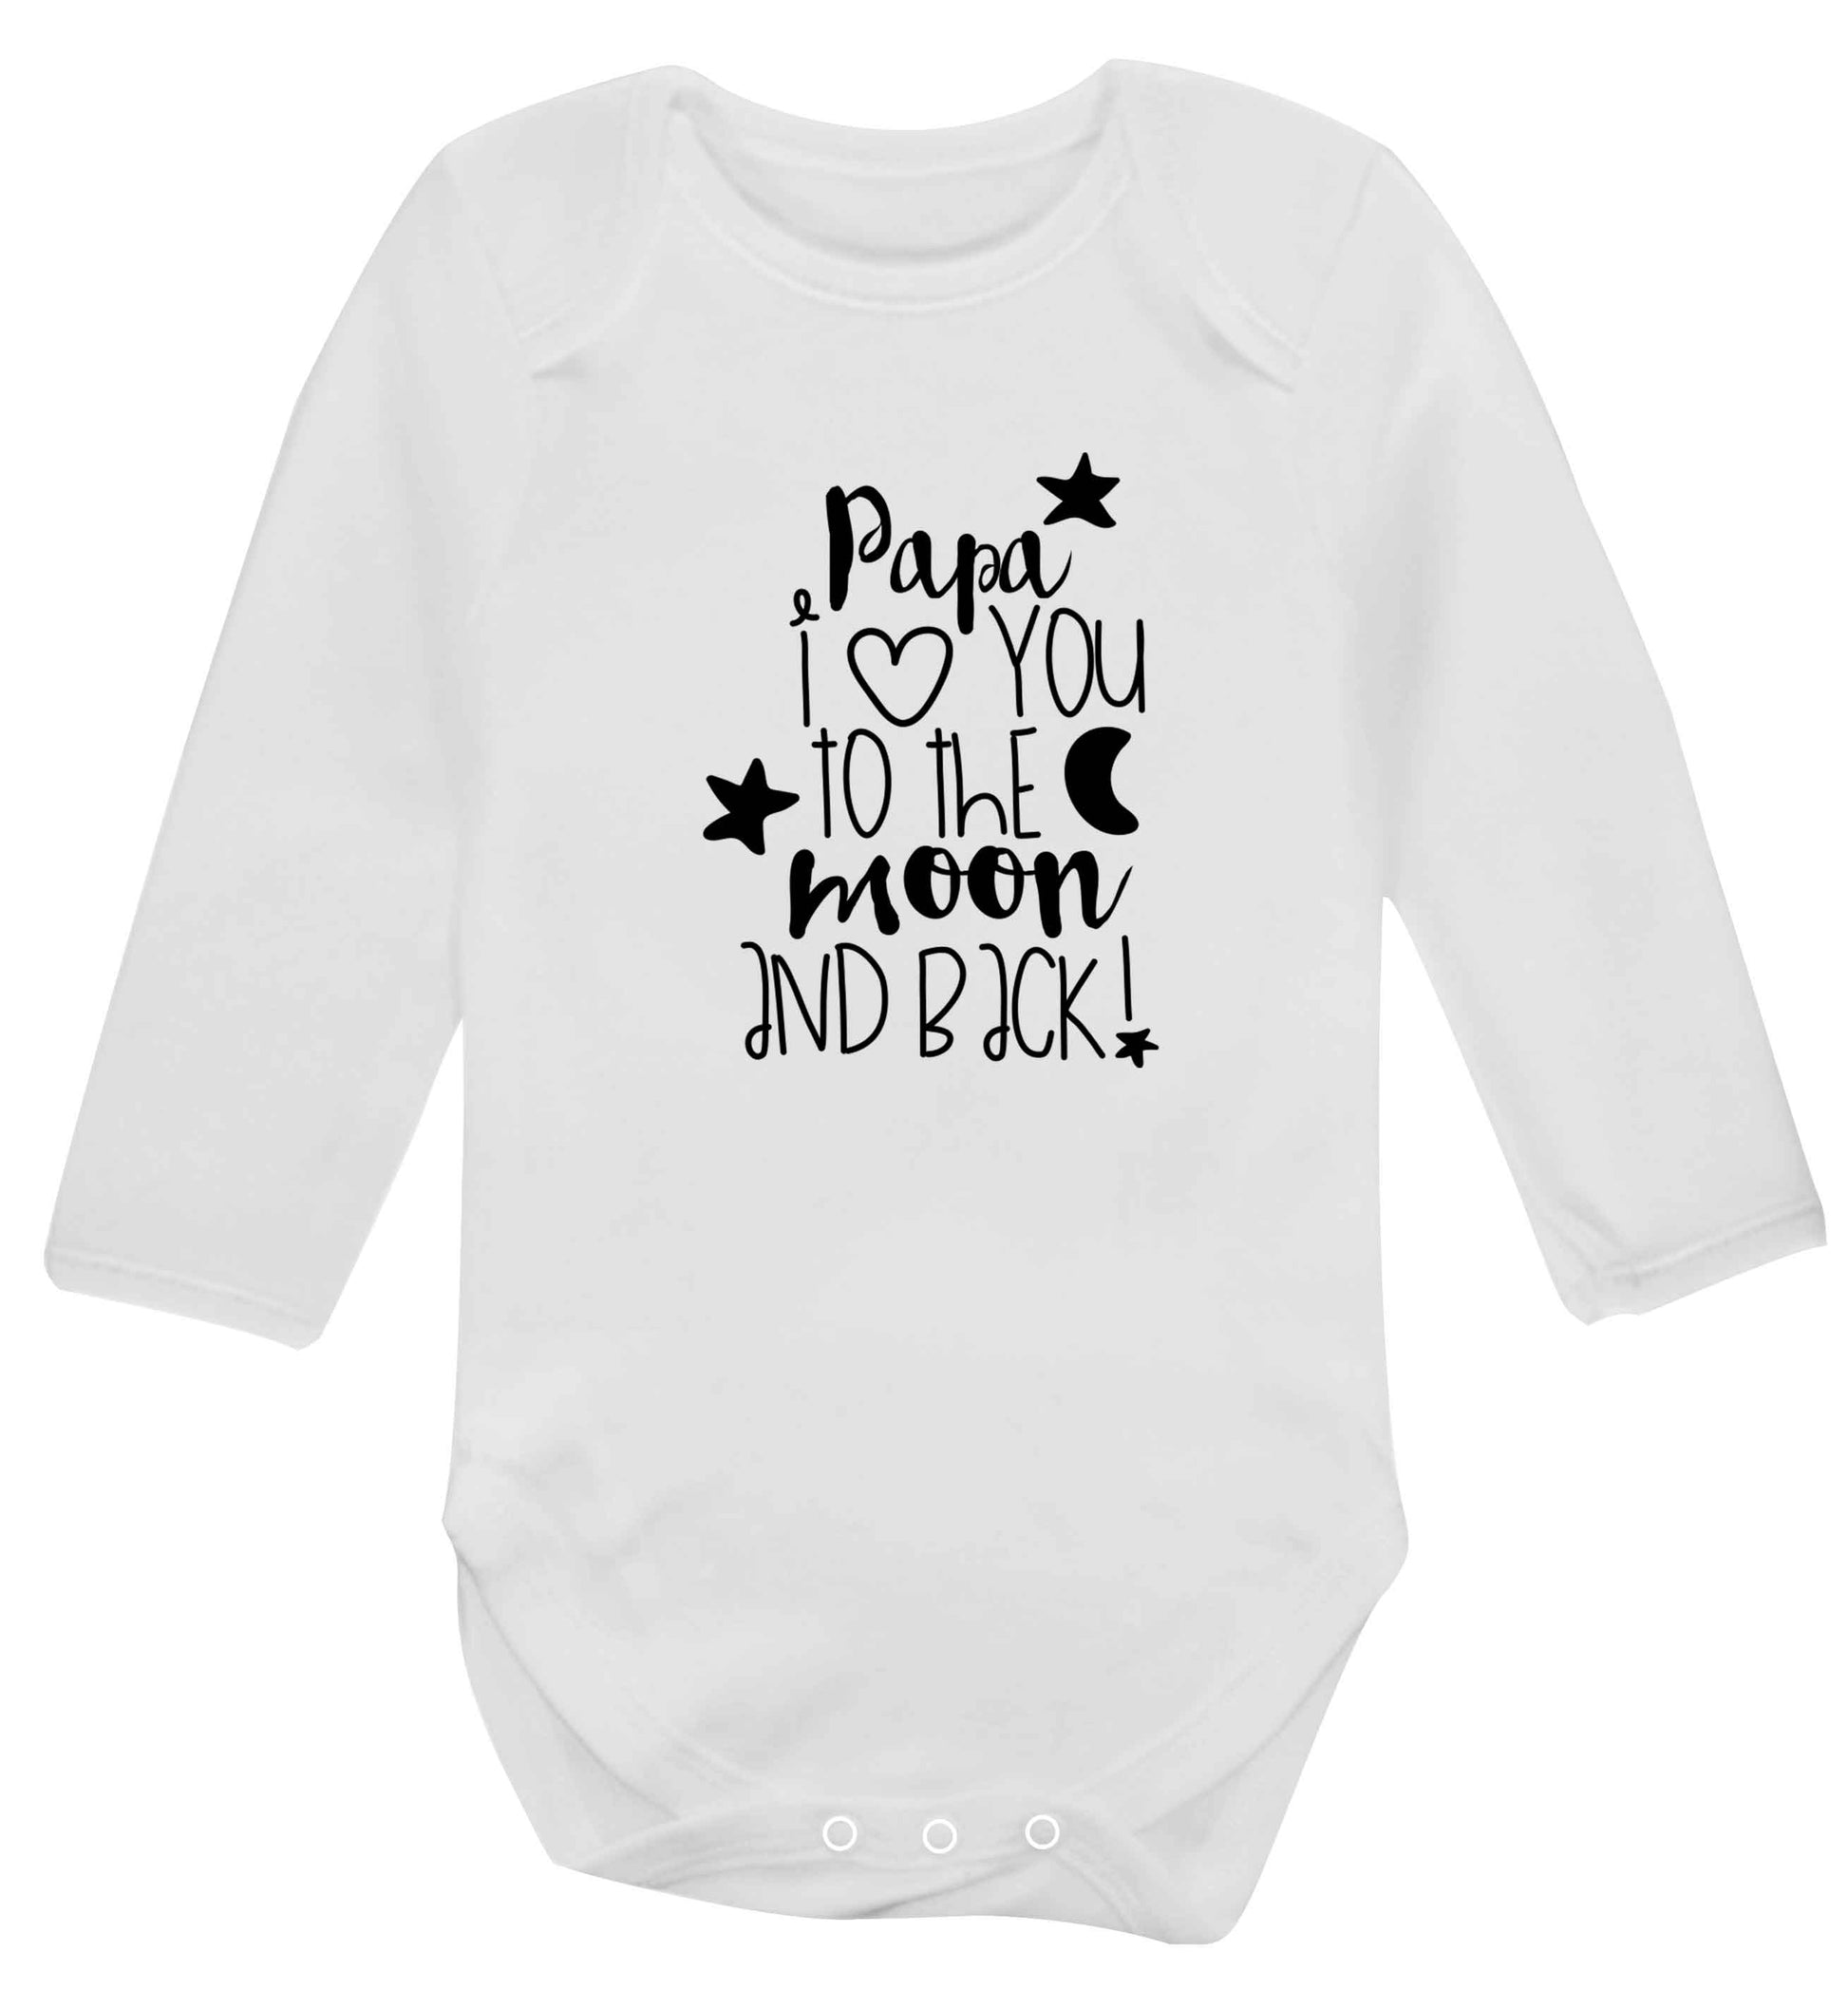 Papa I love you to the moon and back baby vest long sleeved white 6-12 months